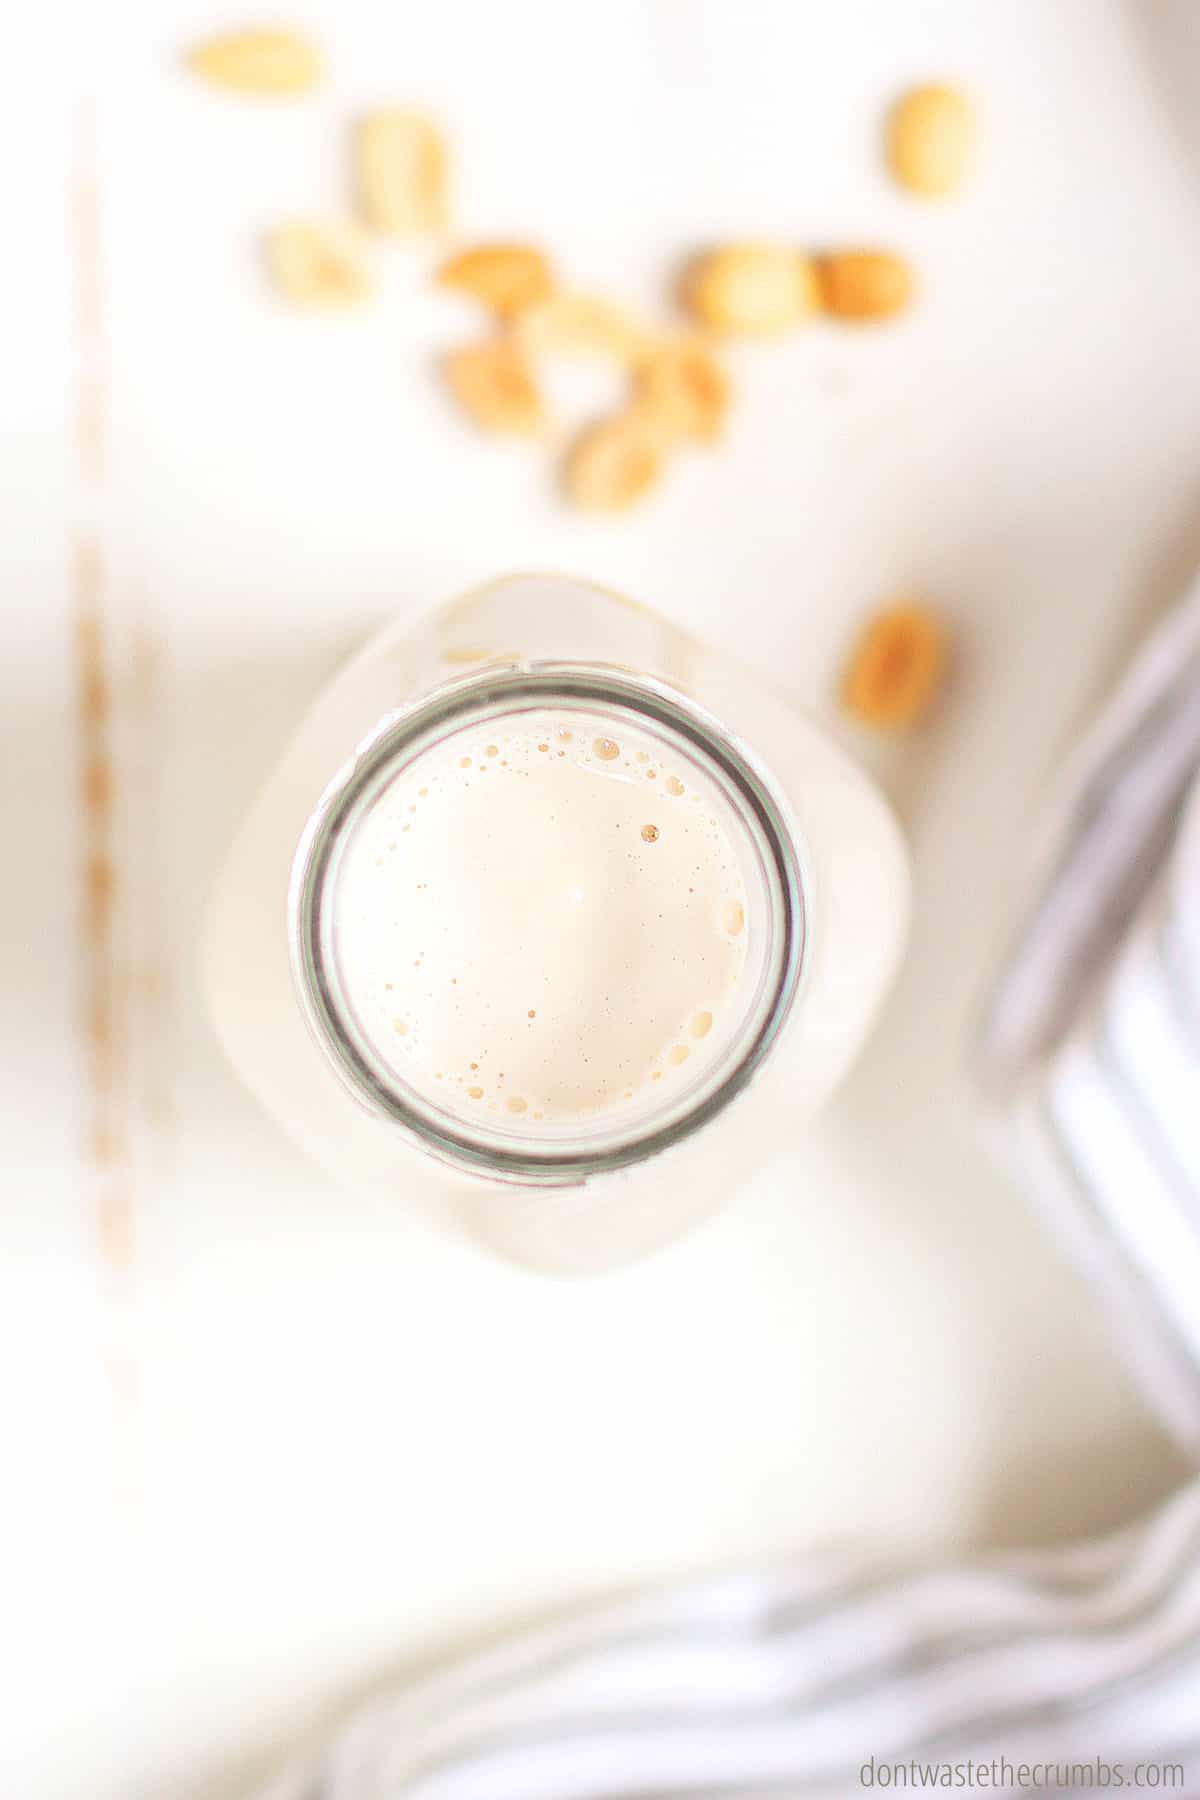 A bottle of freshly blended peanut milk. Smooth, creamy and ready to drink!